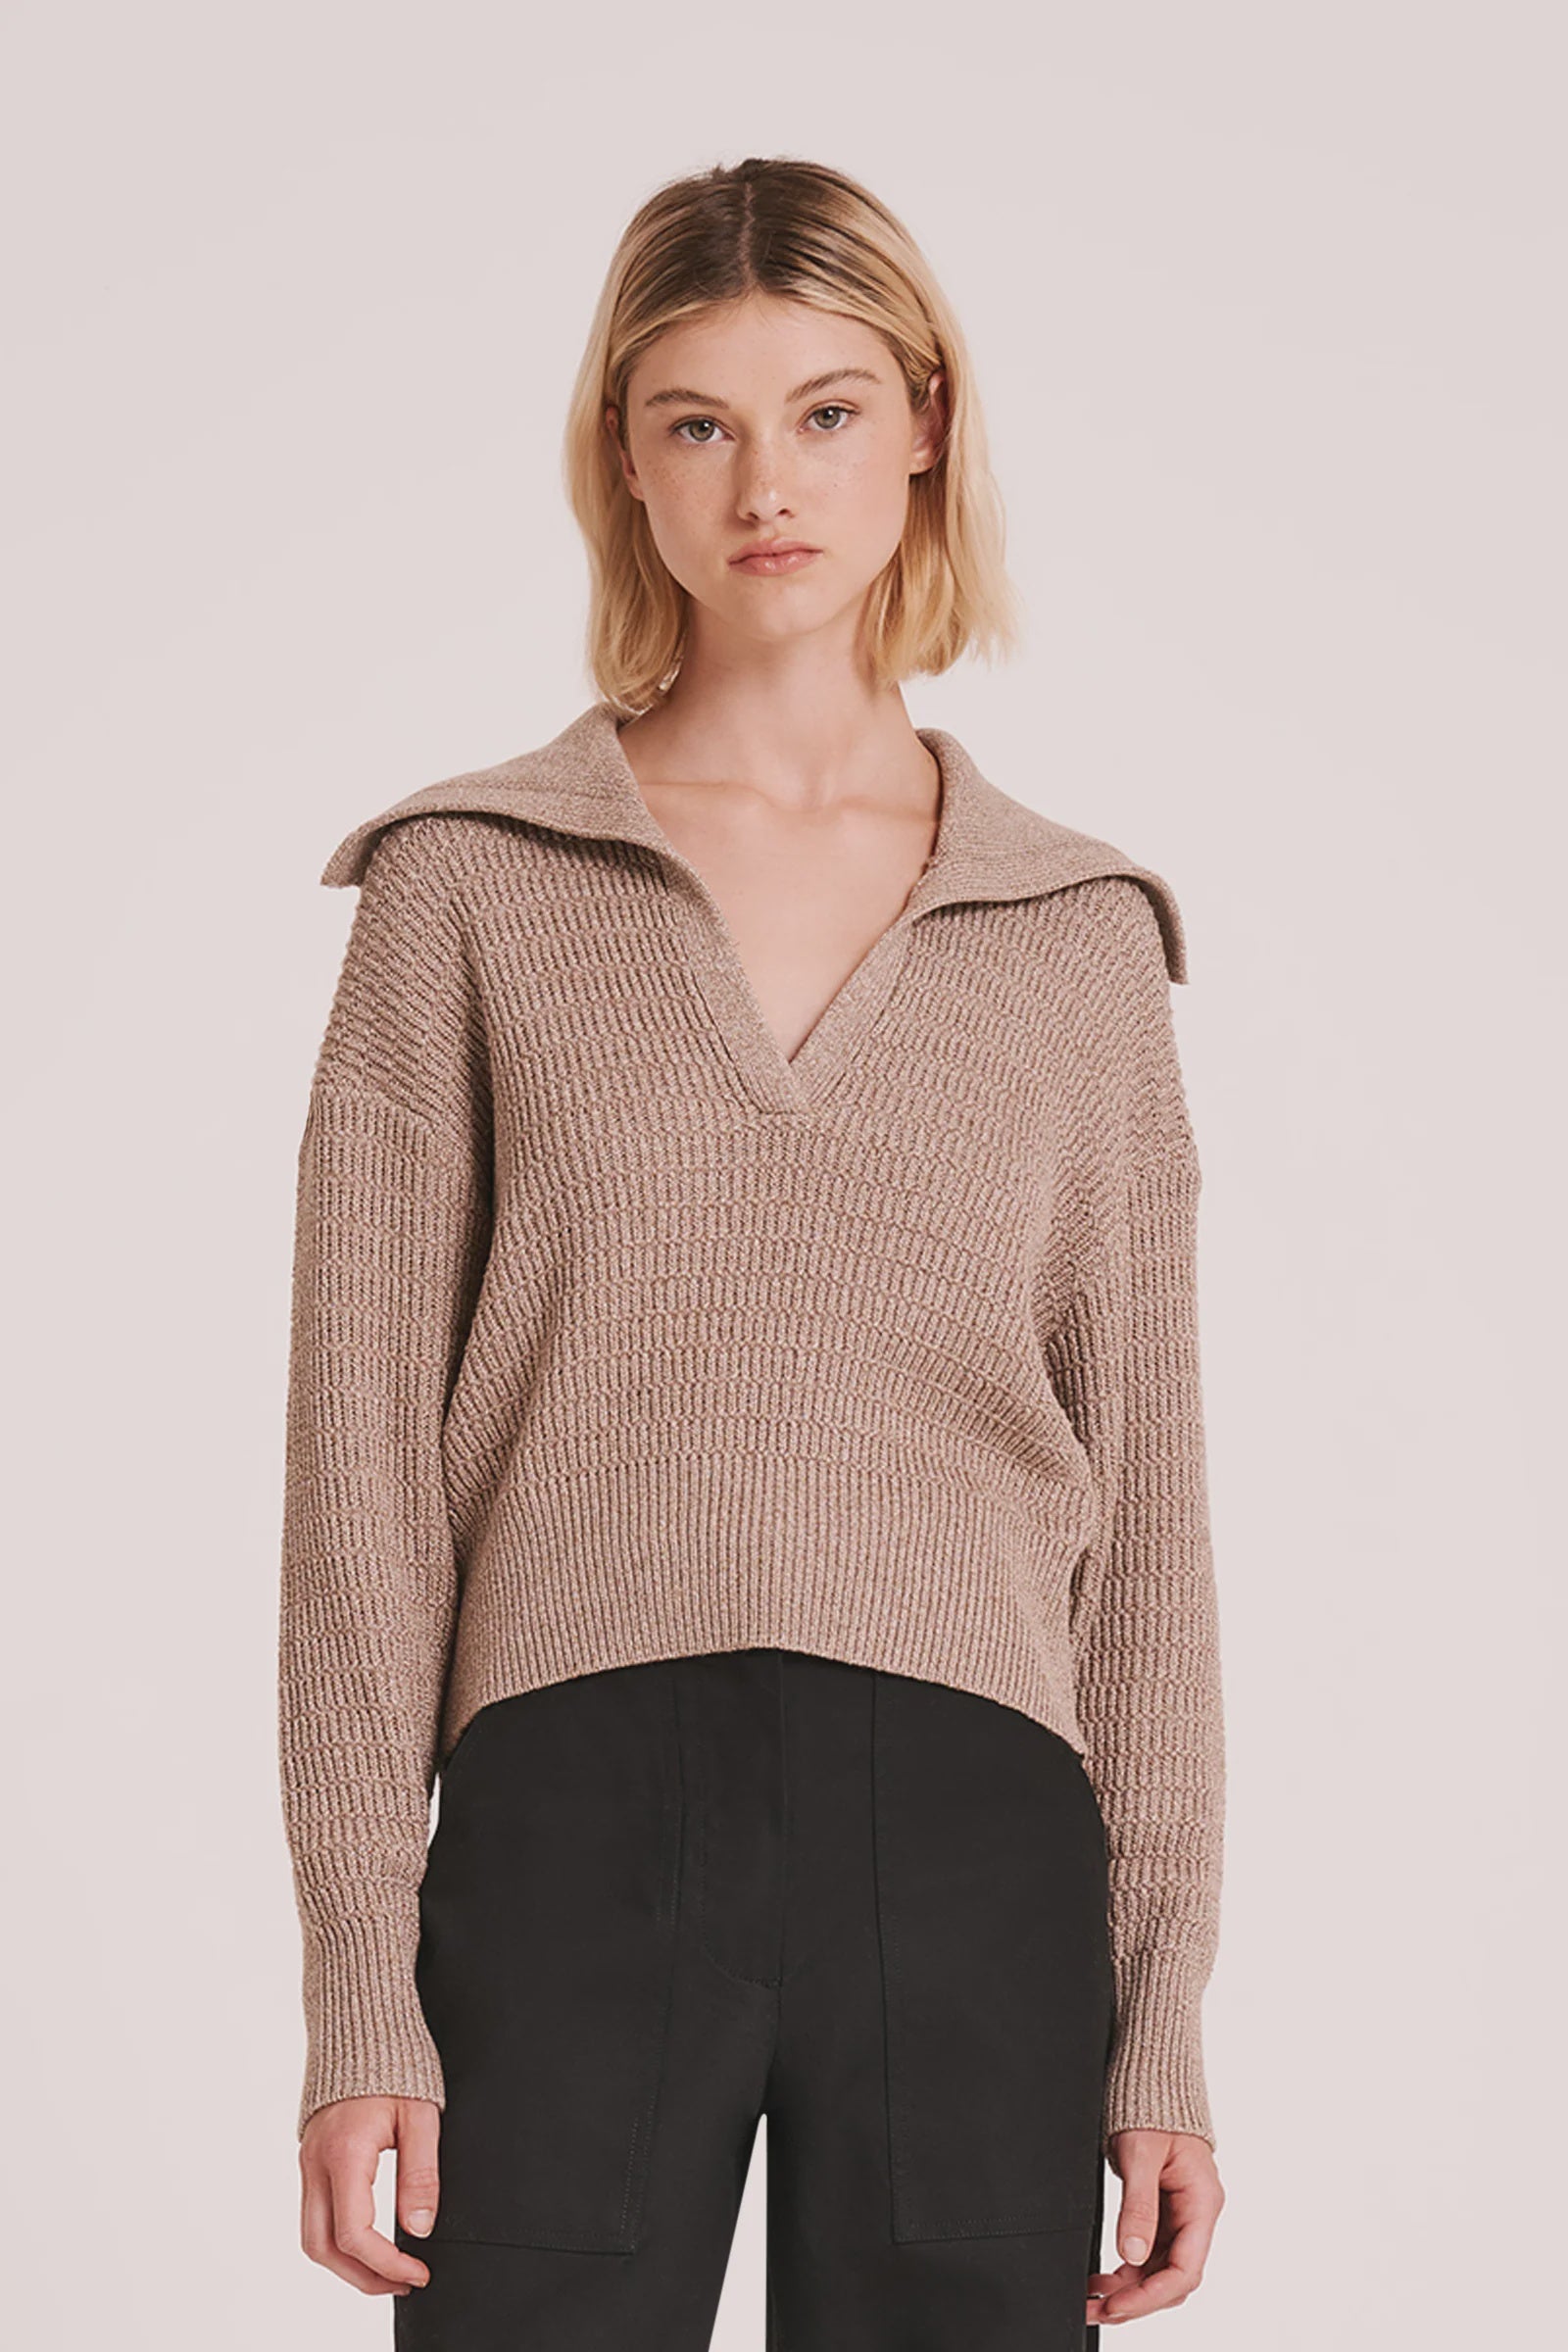 Nude Lucy | Nala Rugby Knit - Pebble